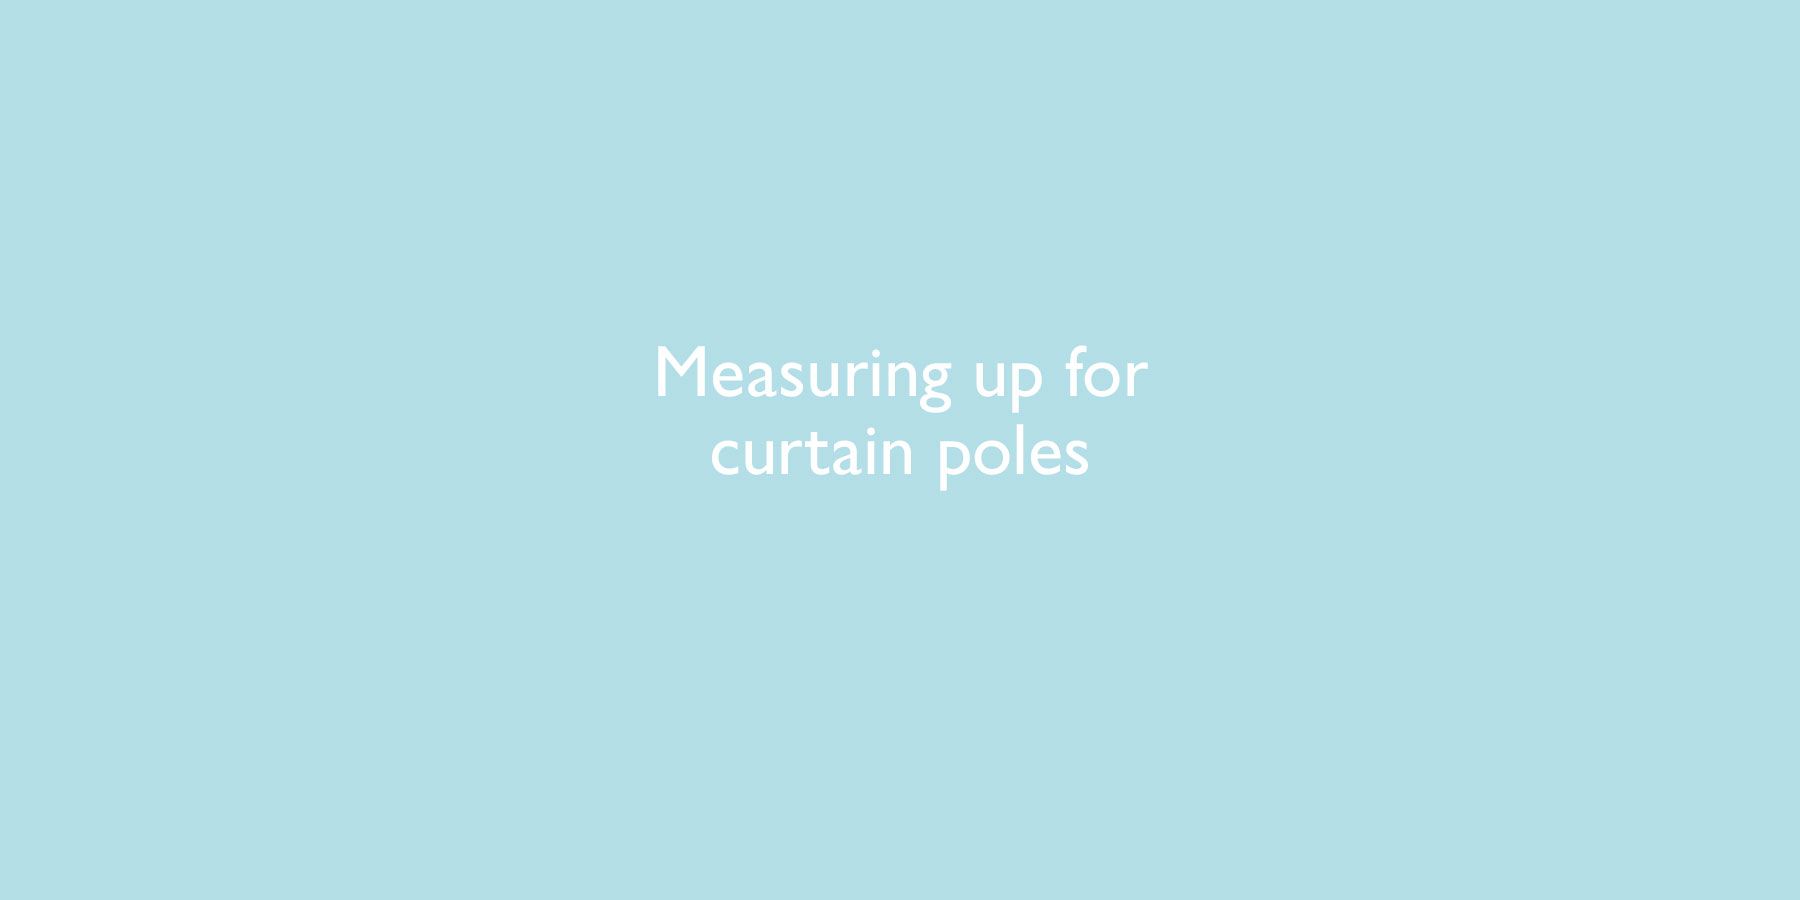 A video about measuring up for curtain poles with John Lewis